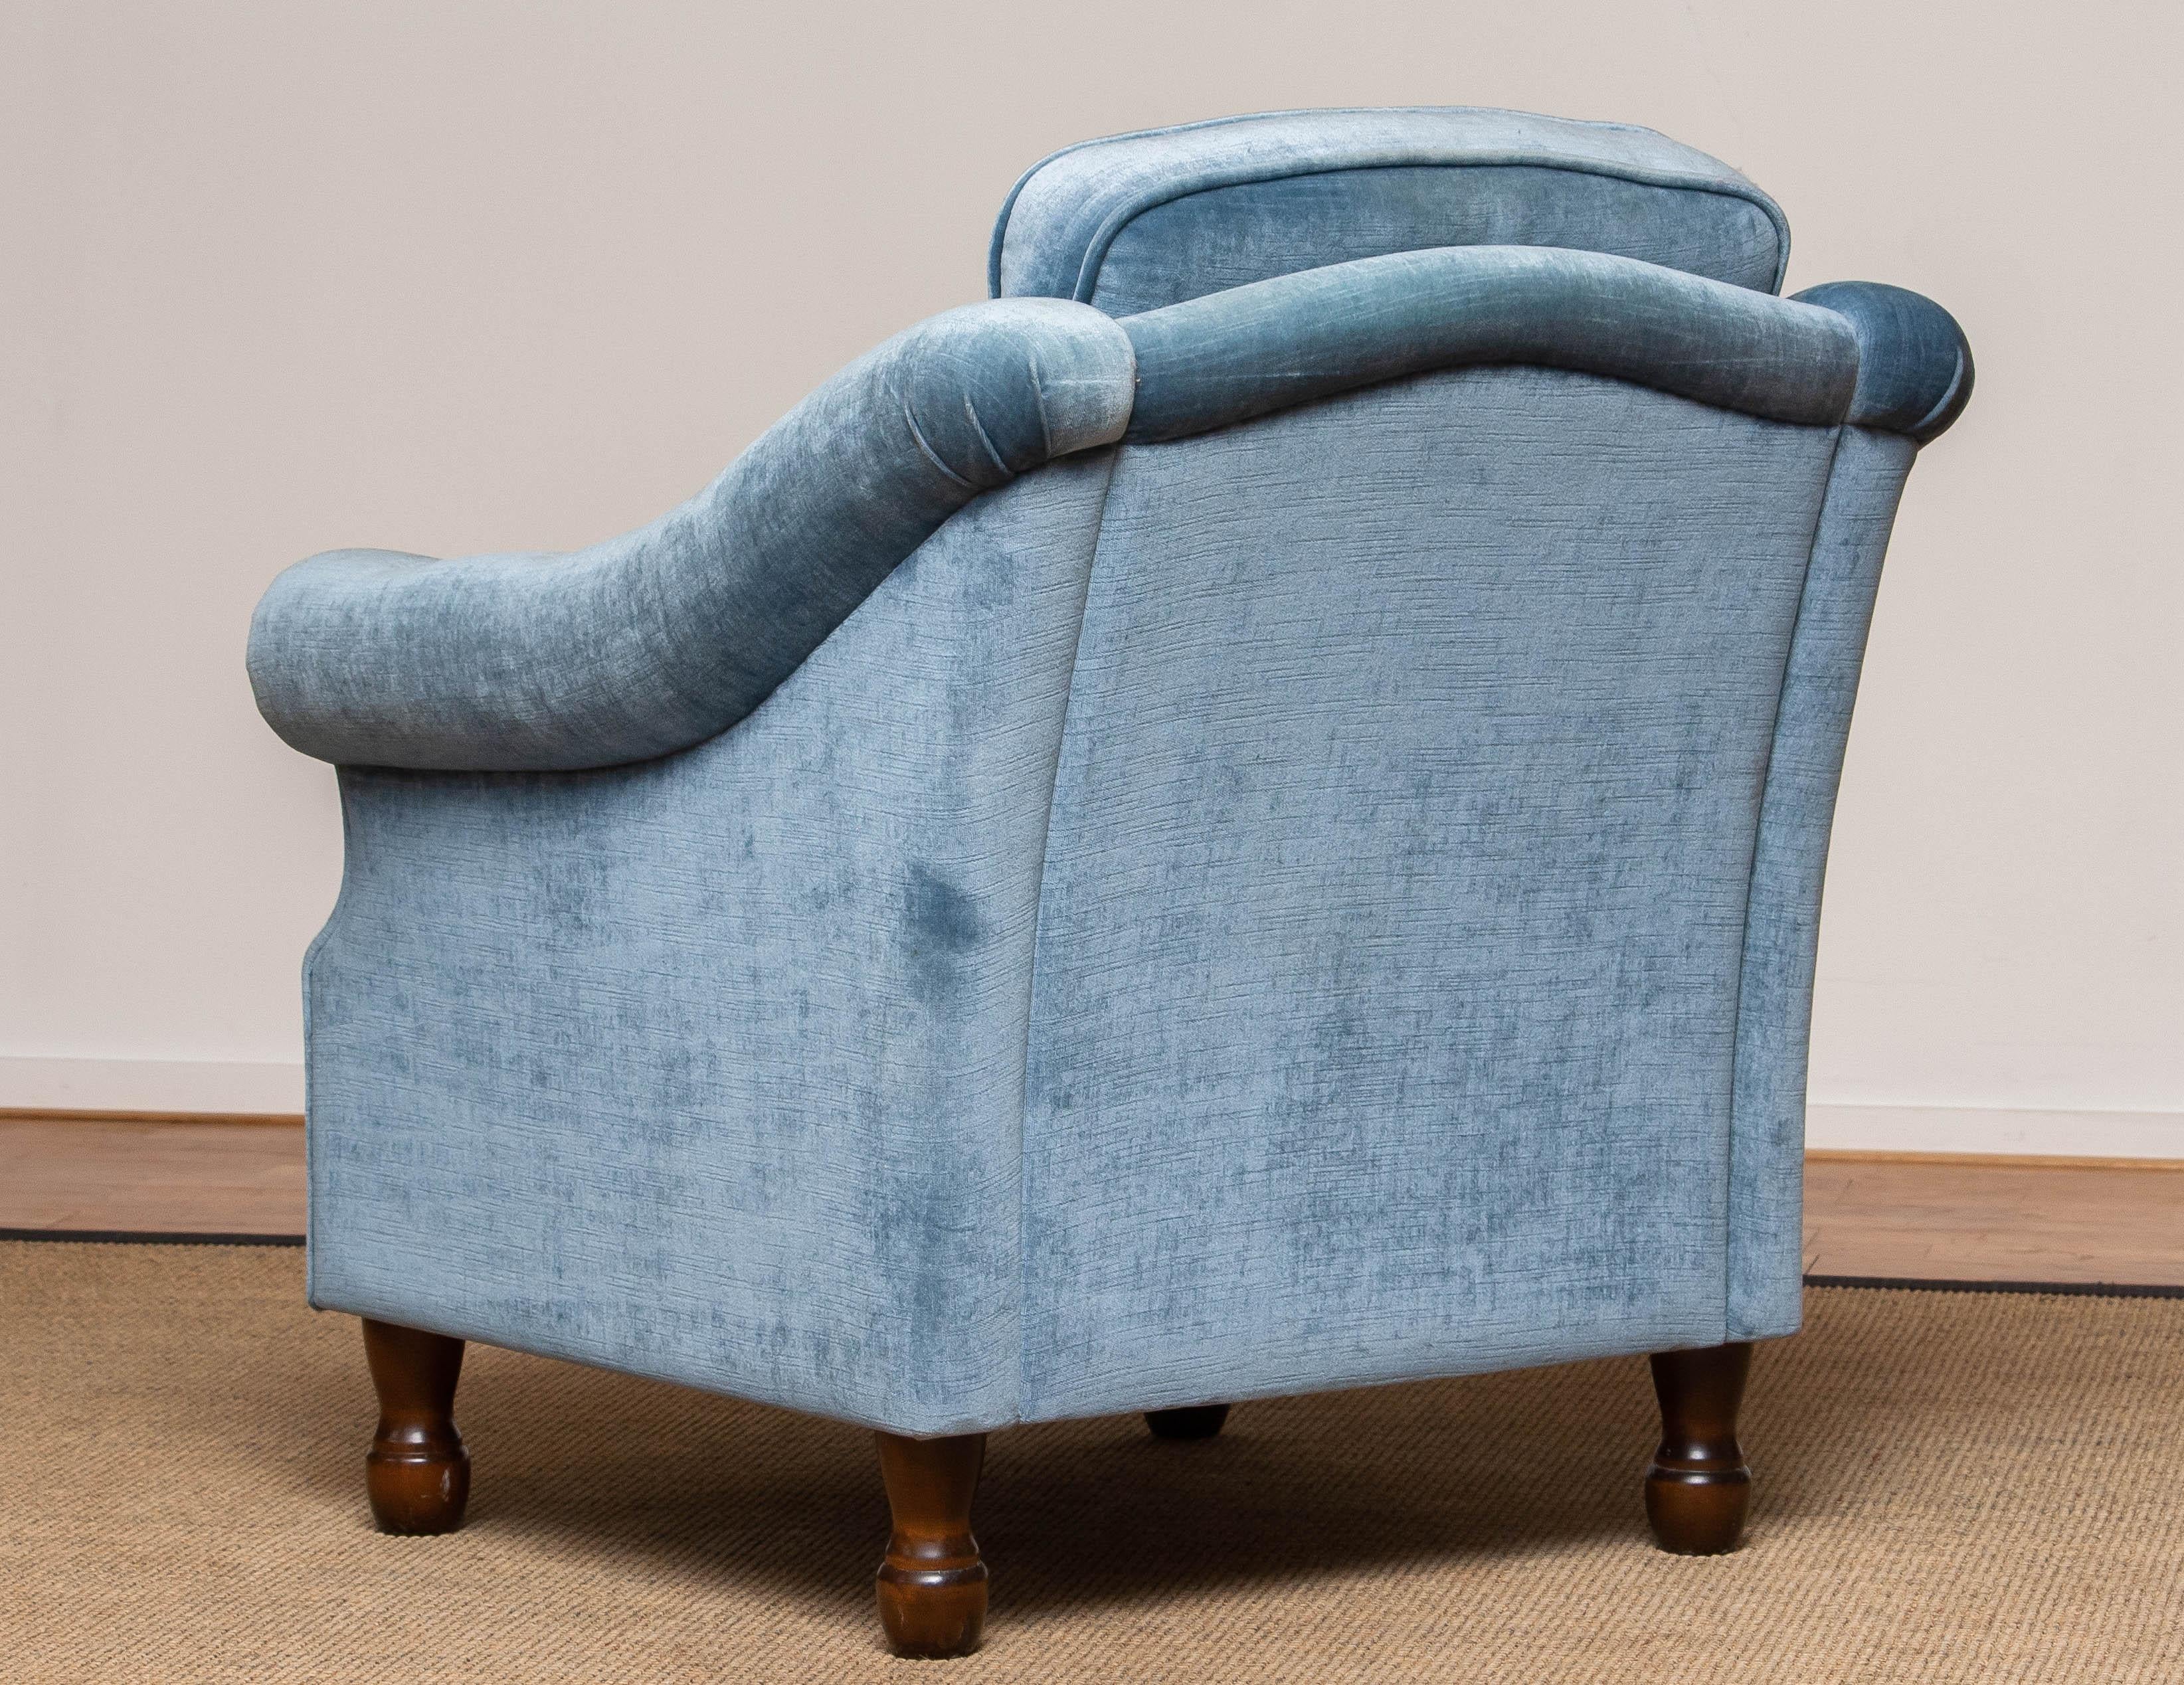 1970's Comfortable Hollywood Regency Lounge Chair with Ice Blue Velvet In Good Condition In Silvolde, Gelderland